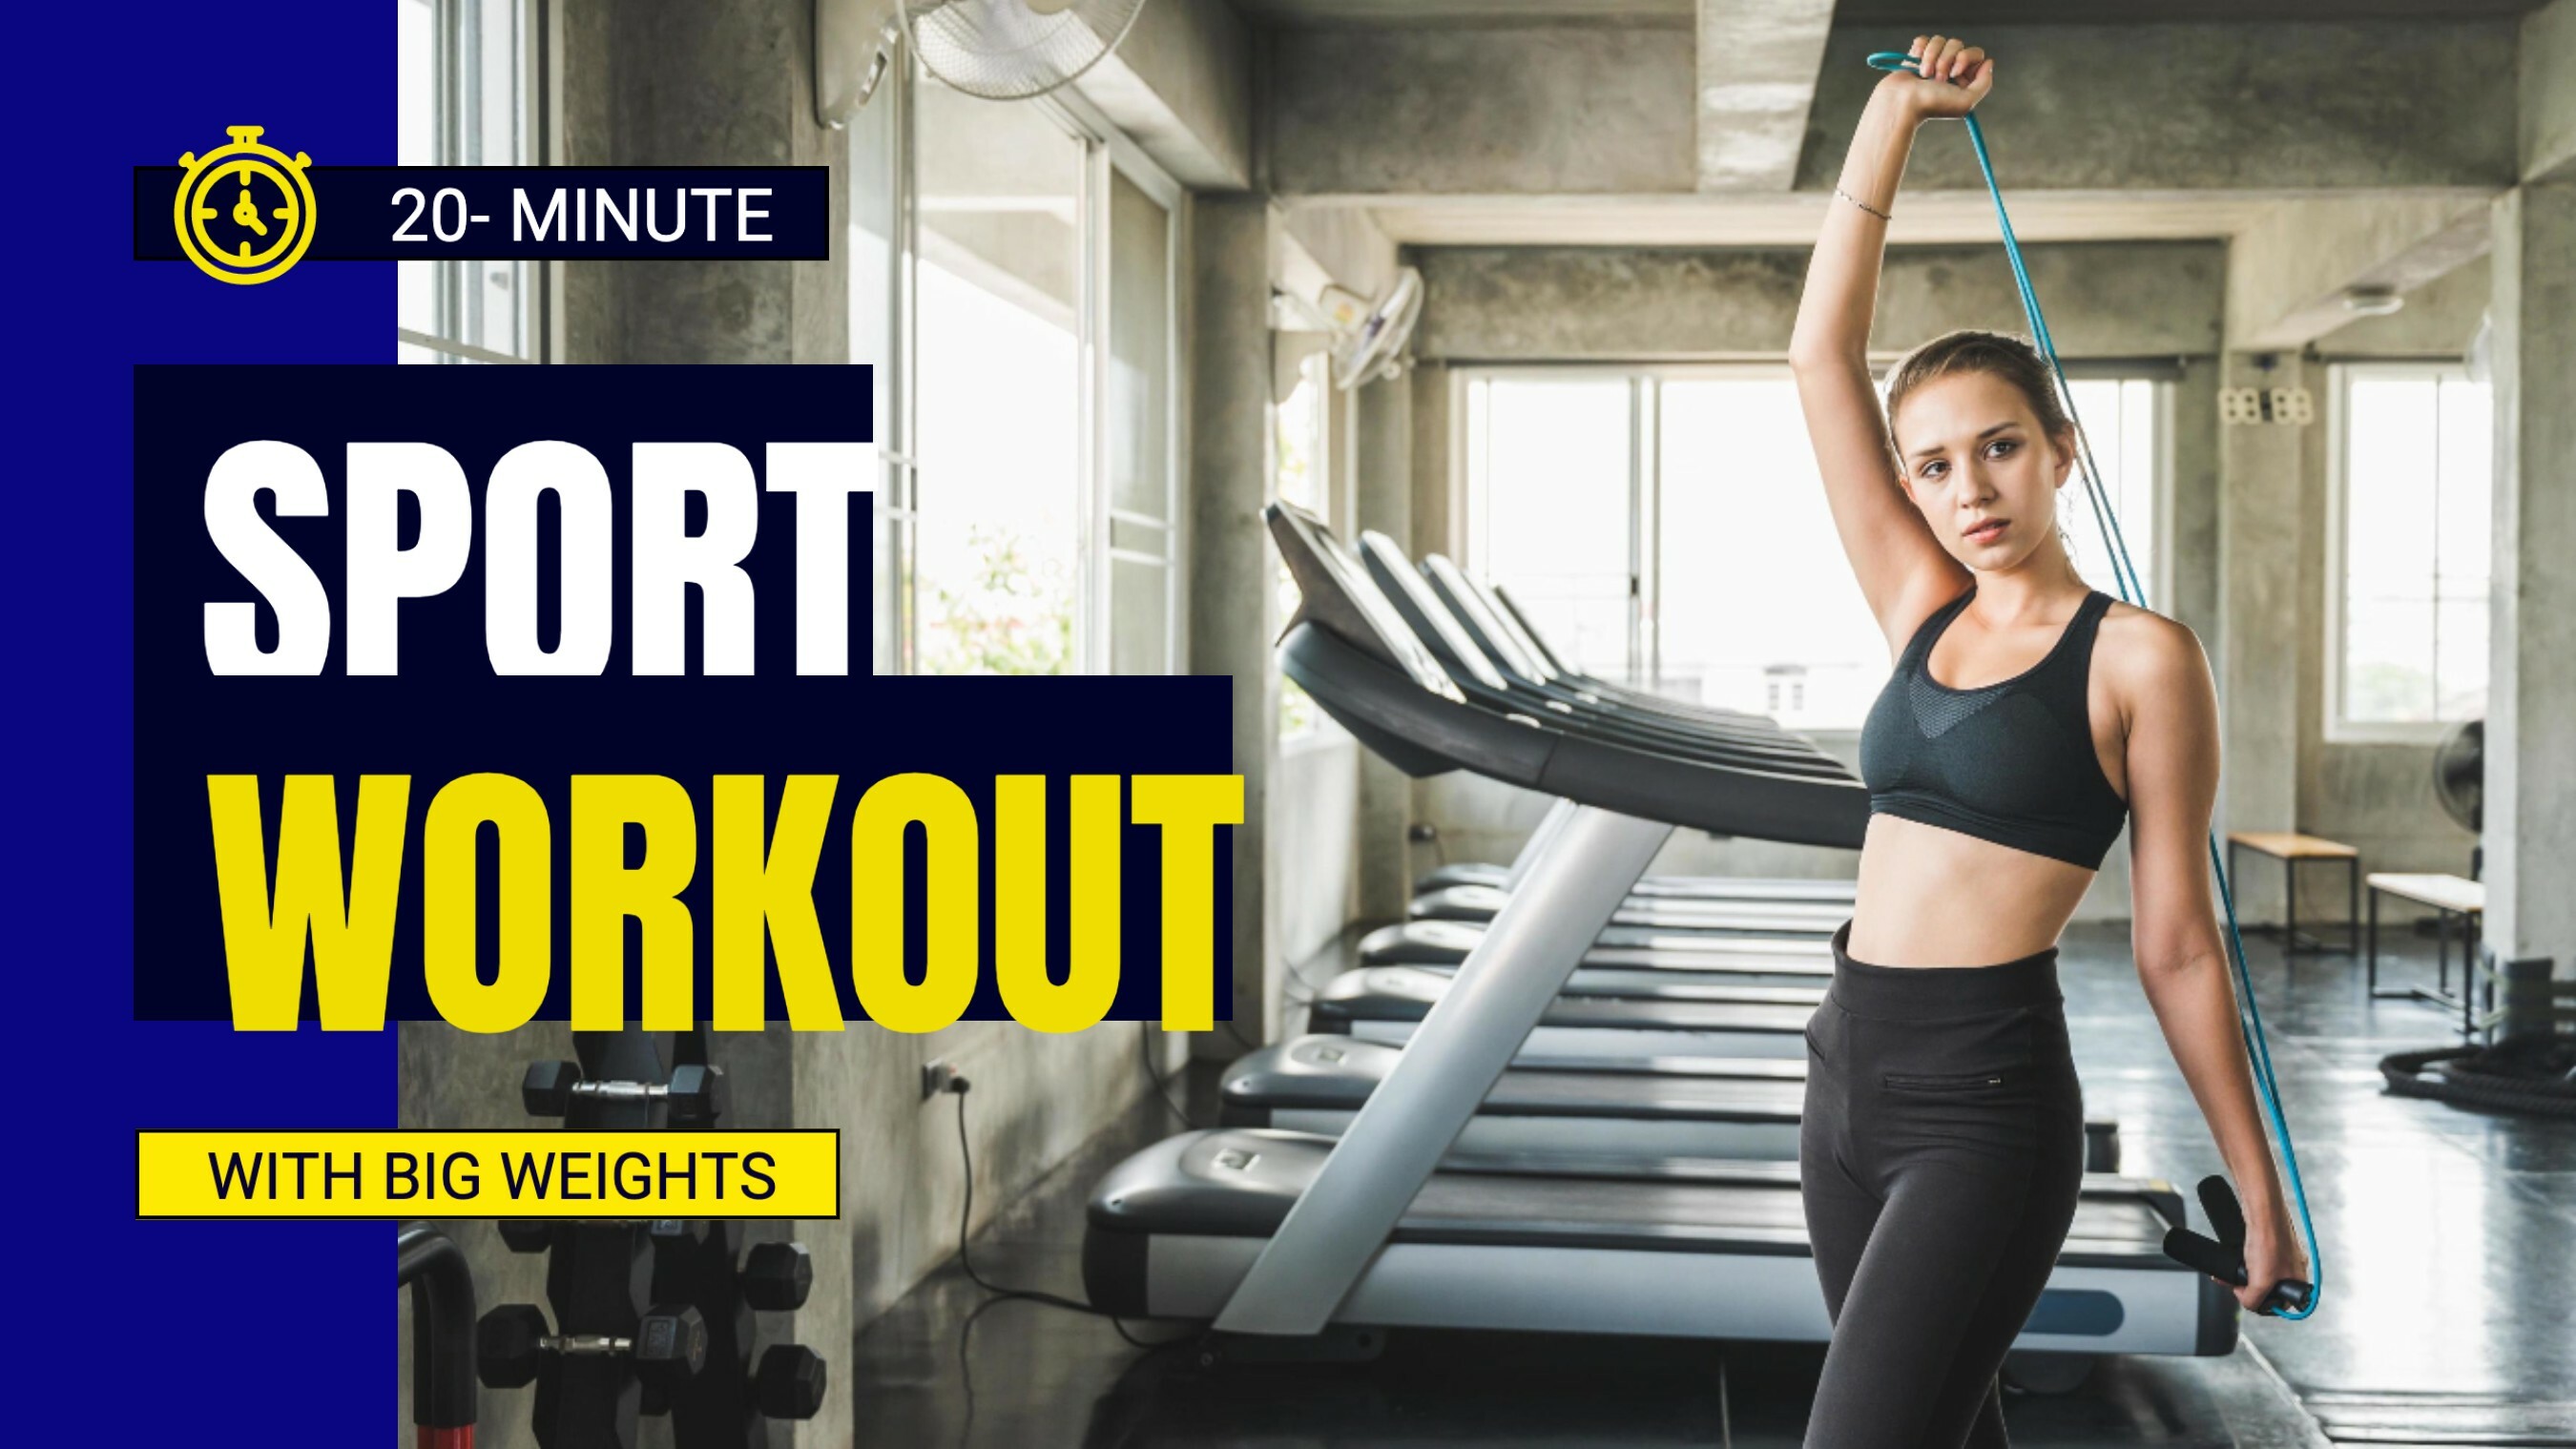 Workout Promo template